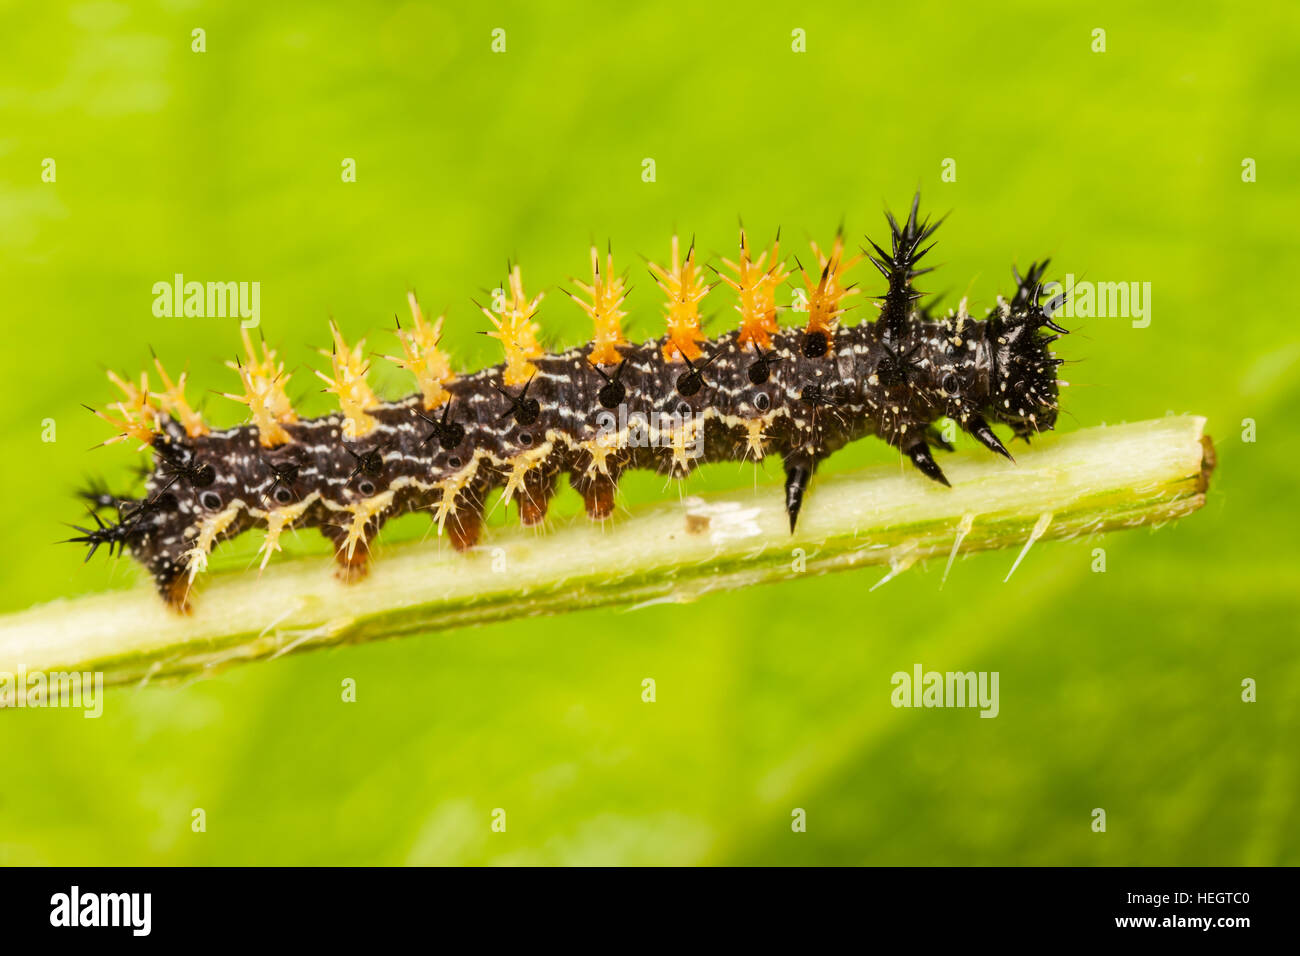 A Question Mark Butterfly (Polygonia interrogationis) caterpillar (larva) perches on a Stinging Nettle plant stem. Stock Photo